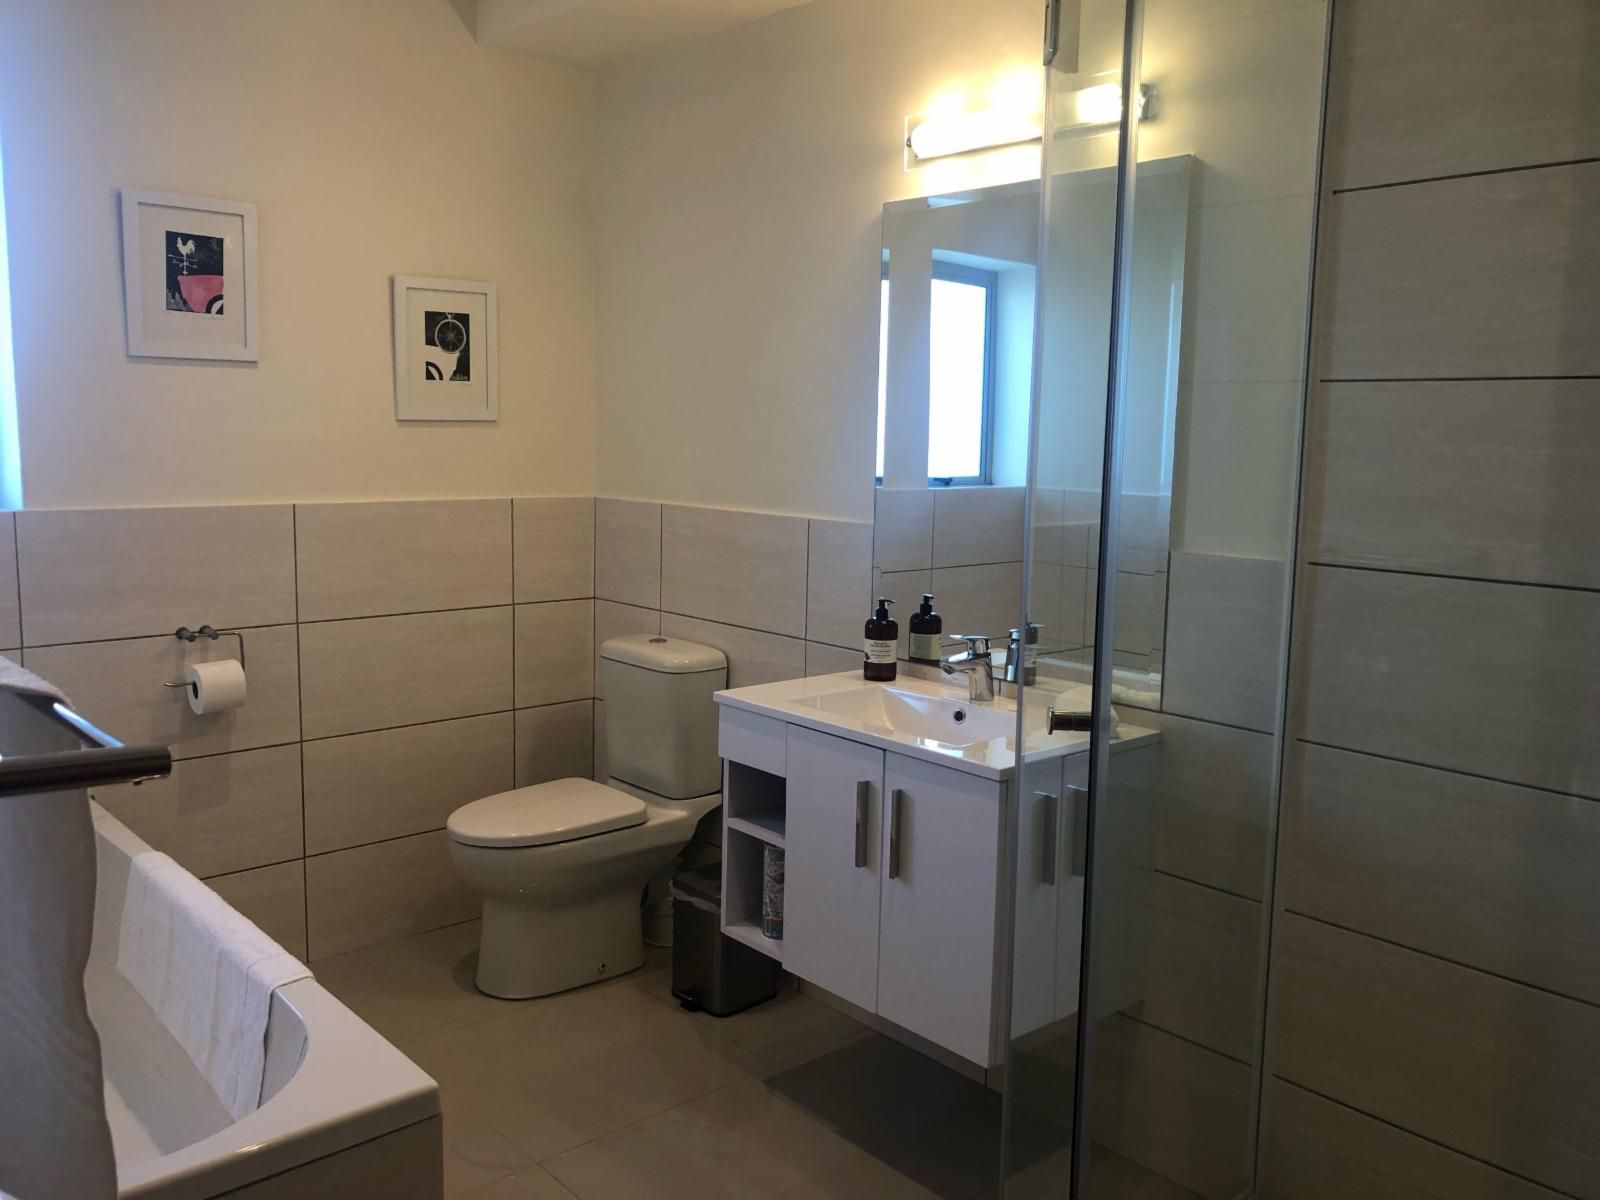 1 Mountain Rd Boutique B And B Fish Hoek Cape Town Western Cape South Africa Bathroom